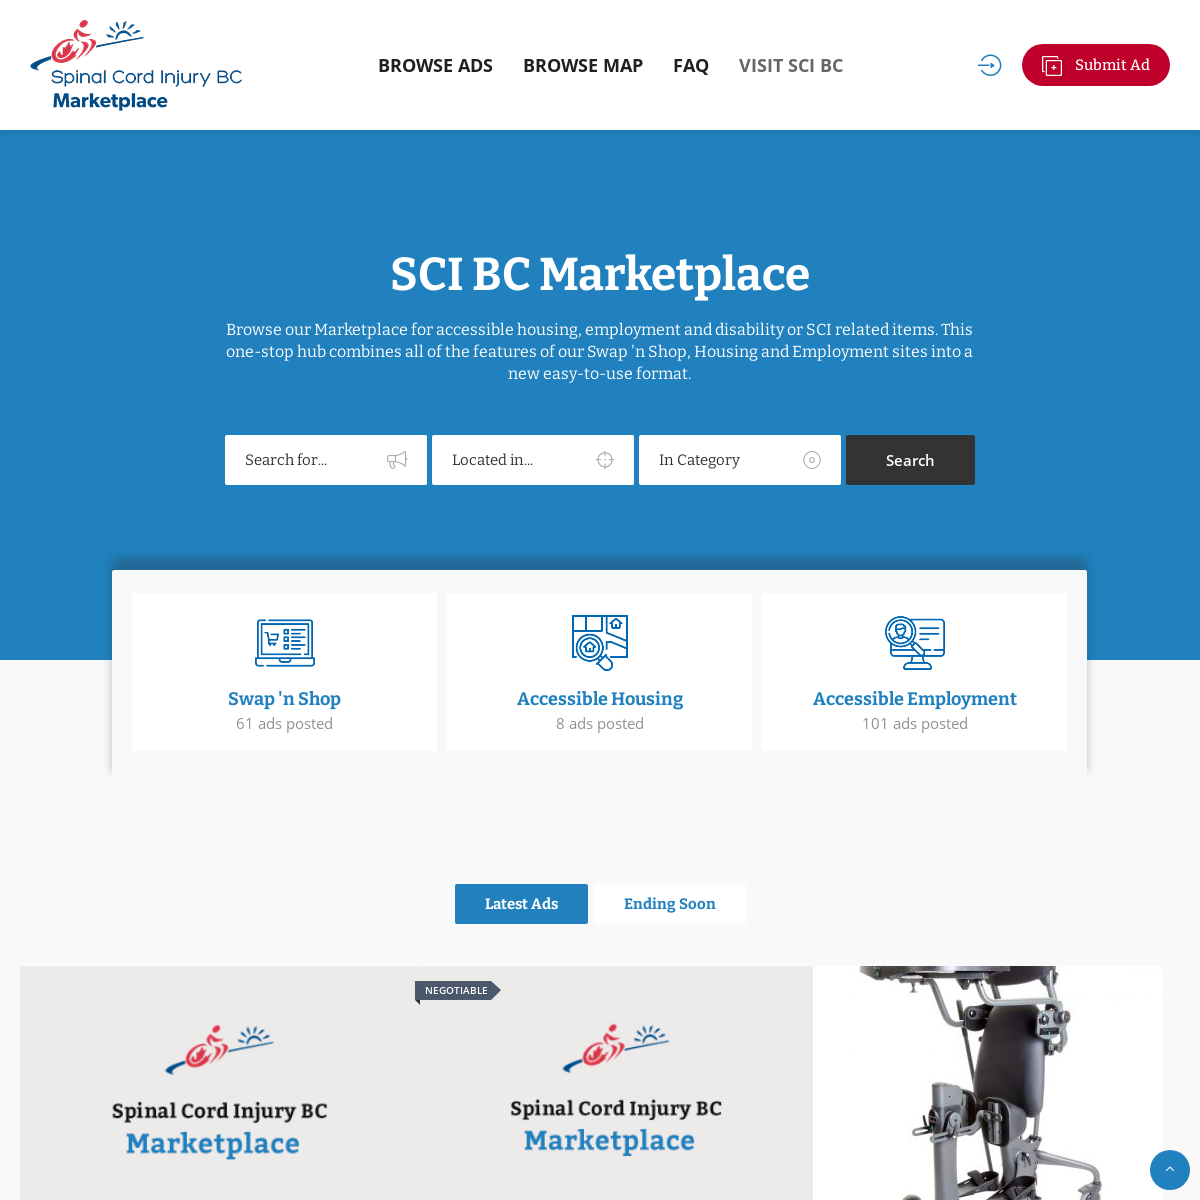 A complete backup of sci-bc-swapnshop.ca